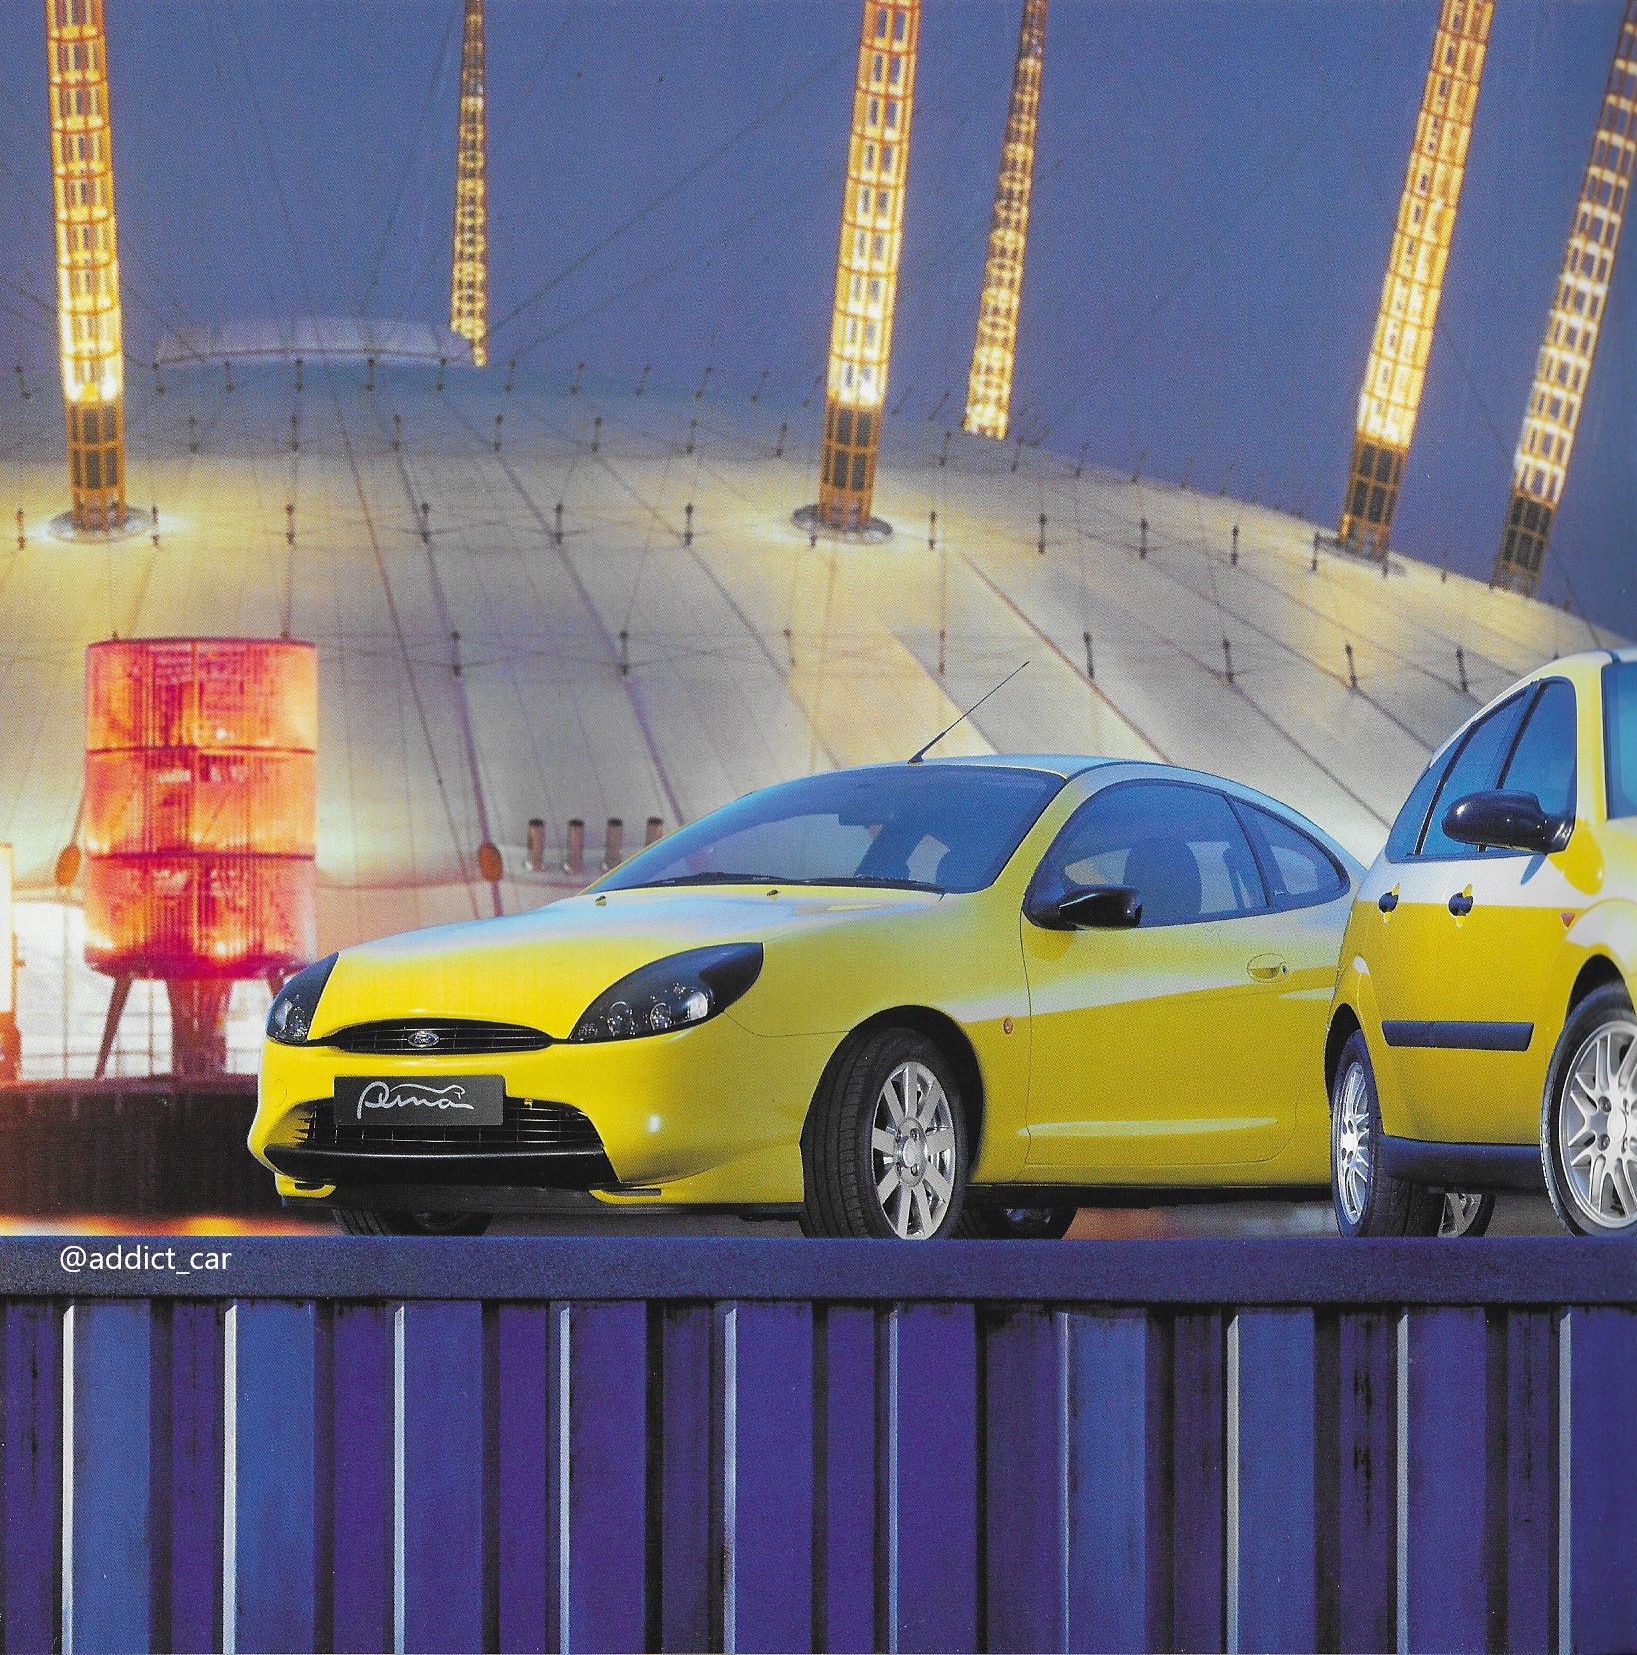 Car Brochure Addict on Twitter: "Ford UK's contribution to the hype of the millennium was to sponsor the 'Journey zone' at the newly-built Dome Greenwich. Numbered yellow special editions of the